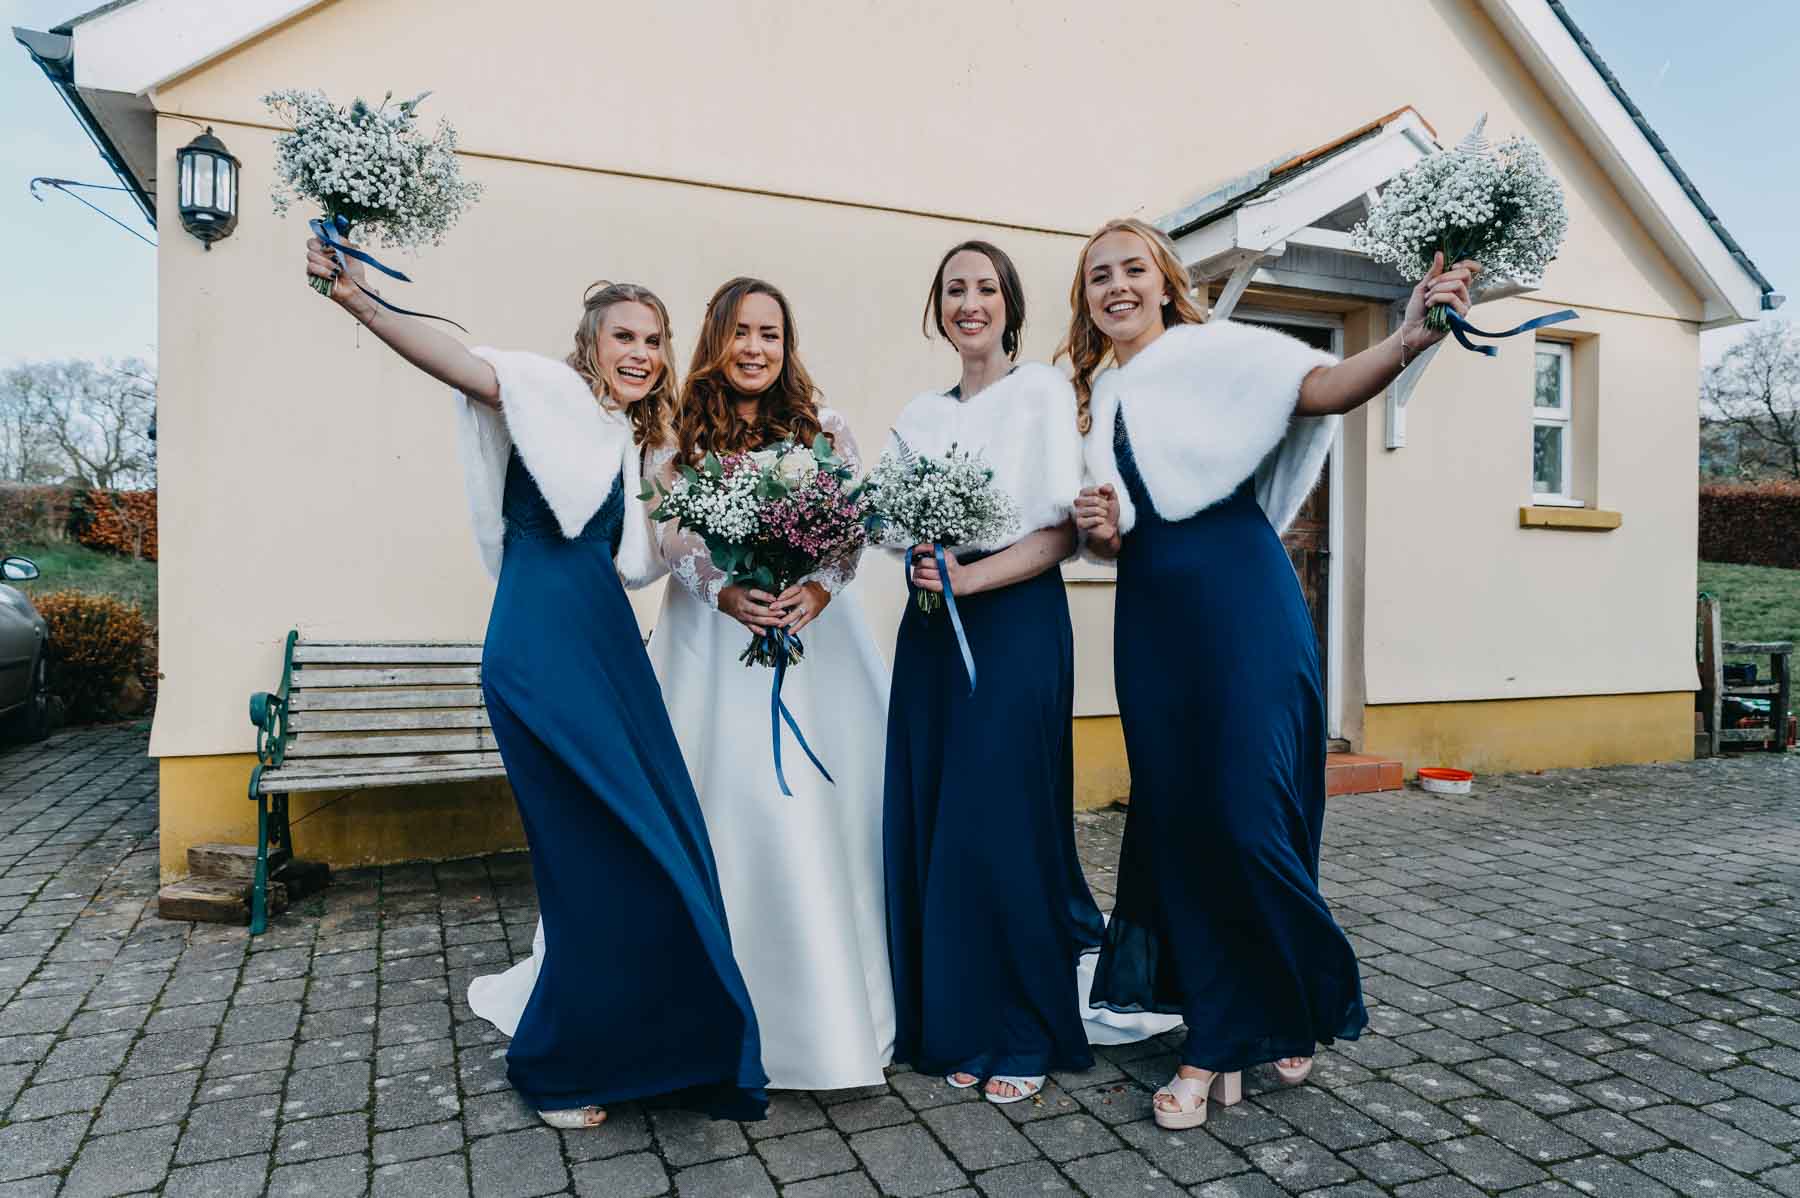 The bride and bridesmaids in fron of the house - natural wedding photography Wales